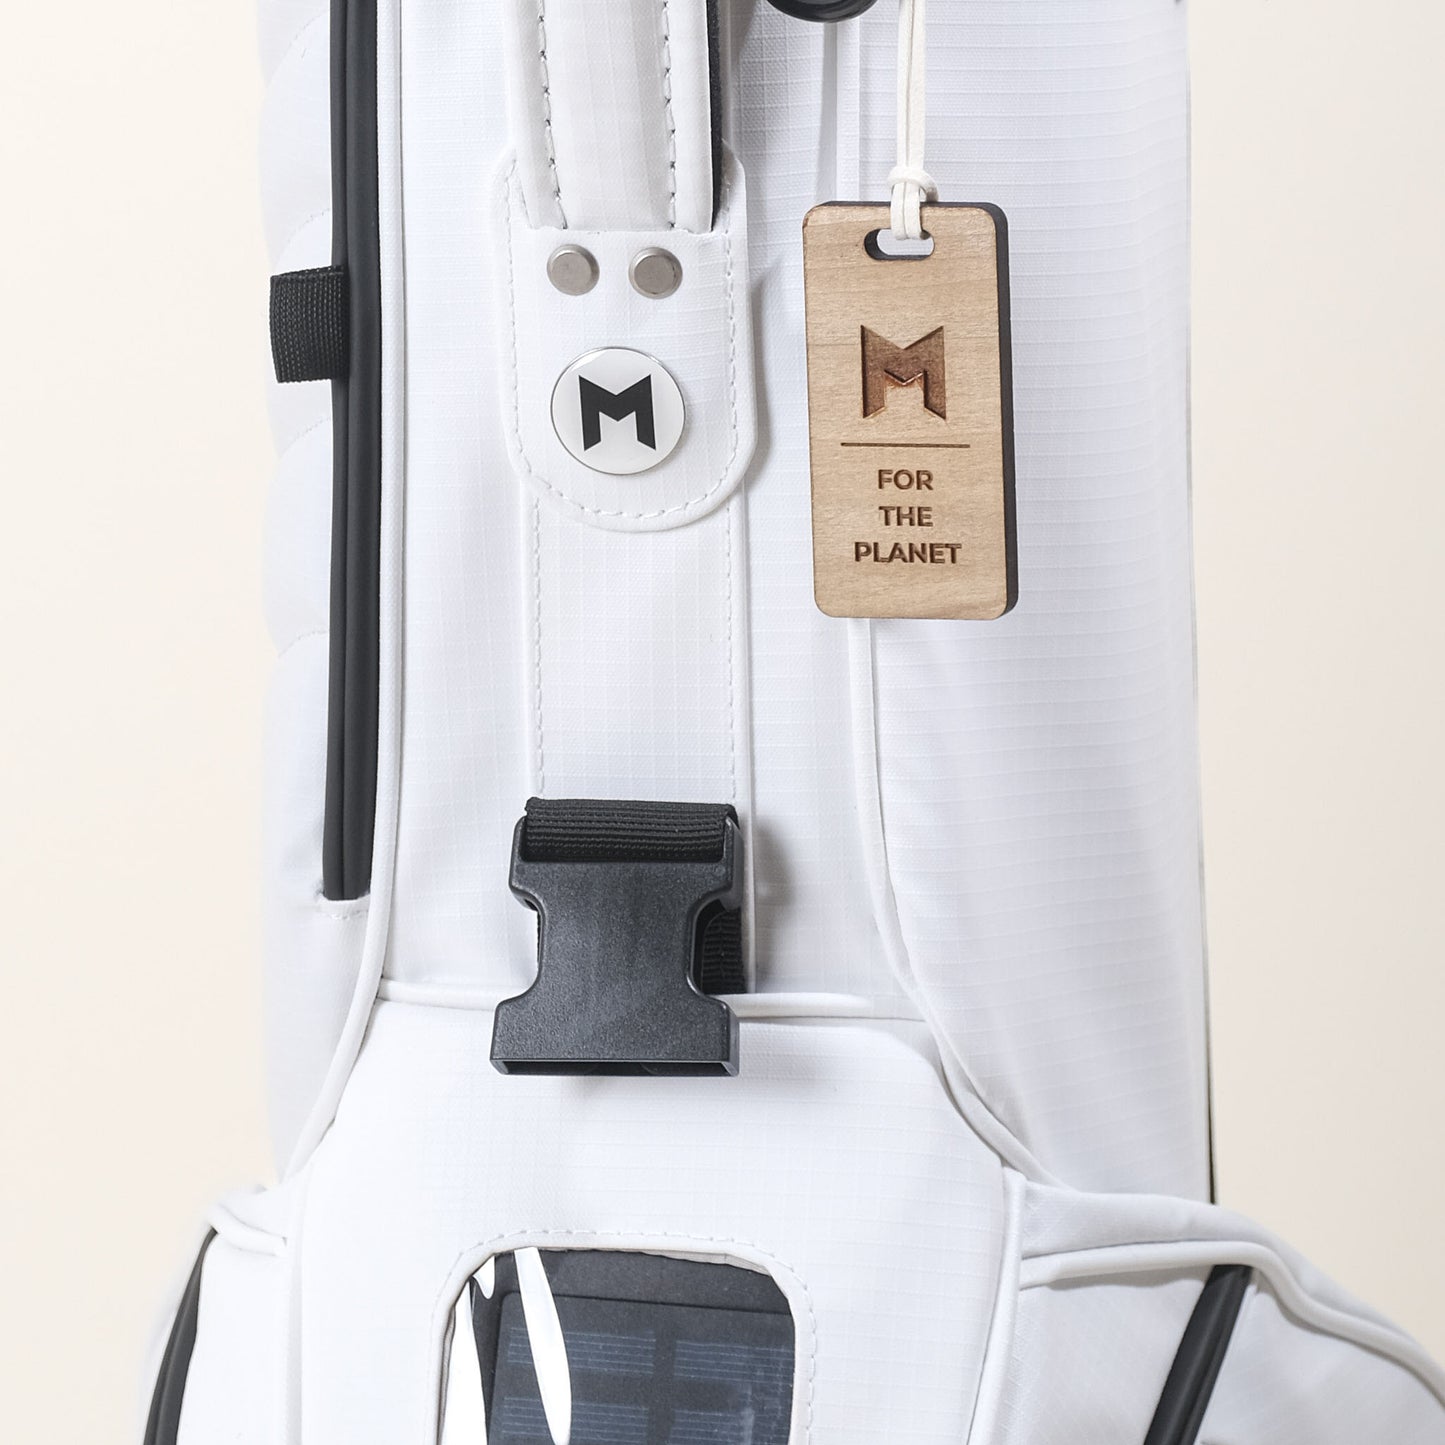 MNML GOLF makes eco friendly golf bags for the modern player. This is our white MR1 eco friendly golf bag, made from 40 plastic water bottles.